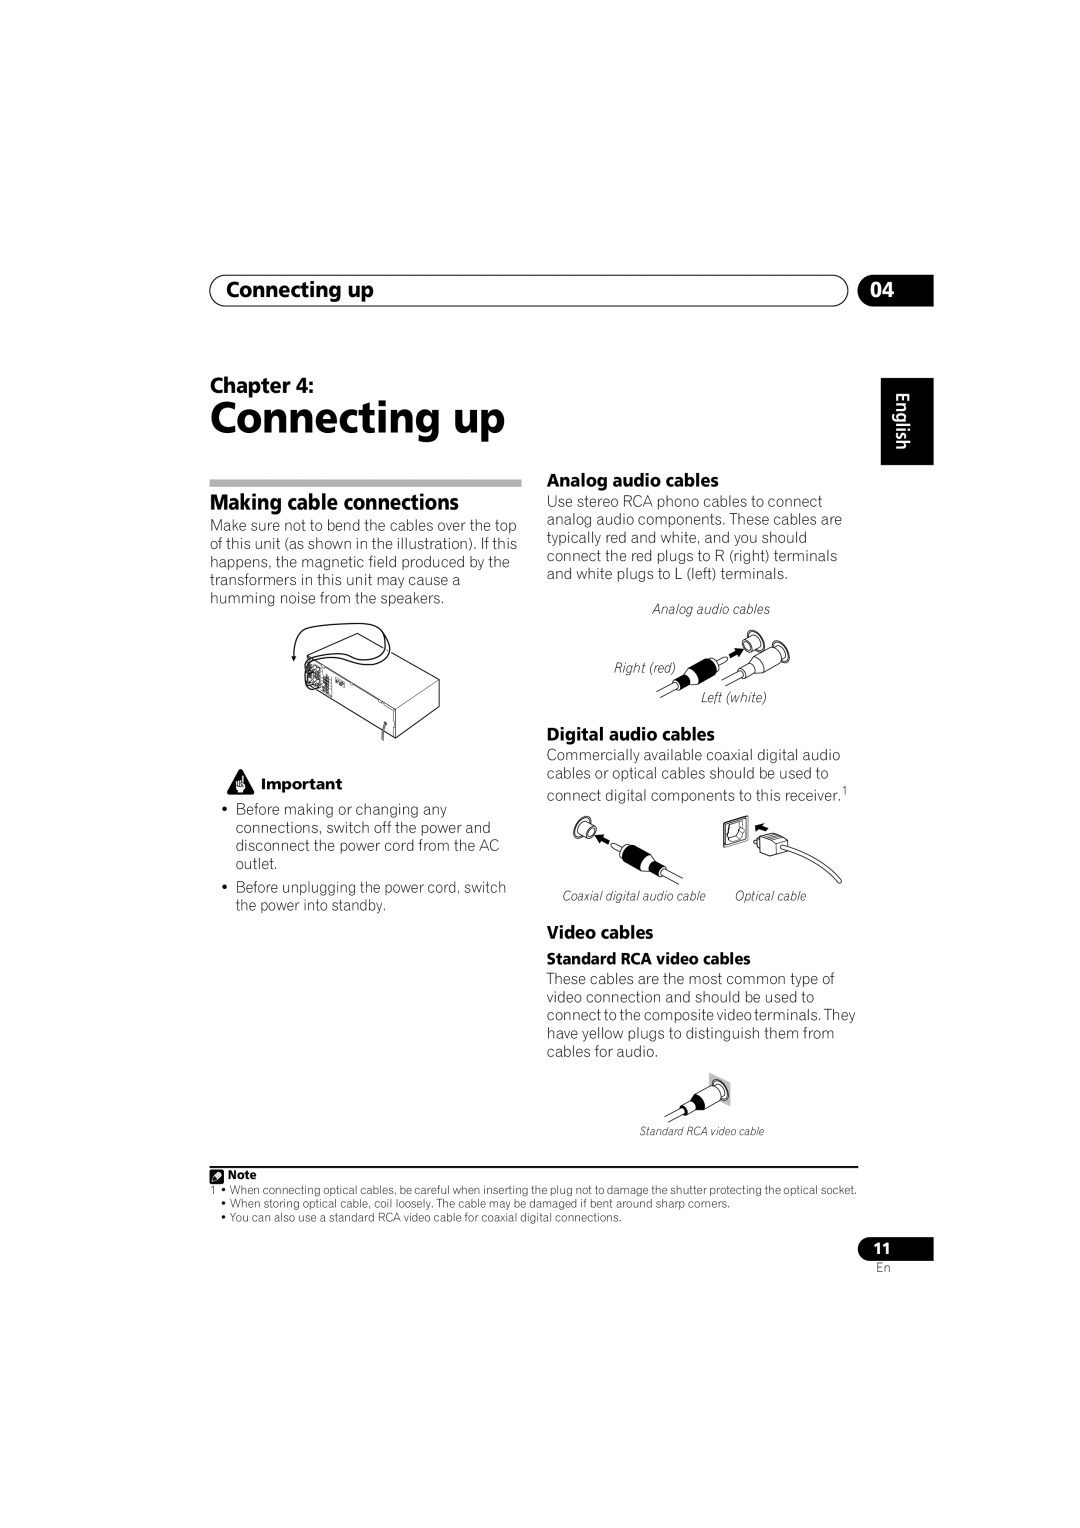 Pioneer VSX-516-S/-K operating instructions Connecting up Chapter, Making cable connections, English, Italiano, Español 